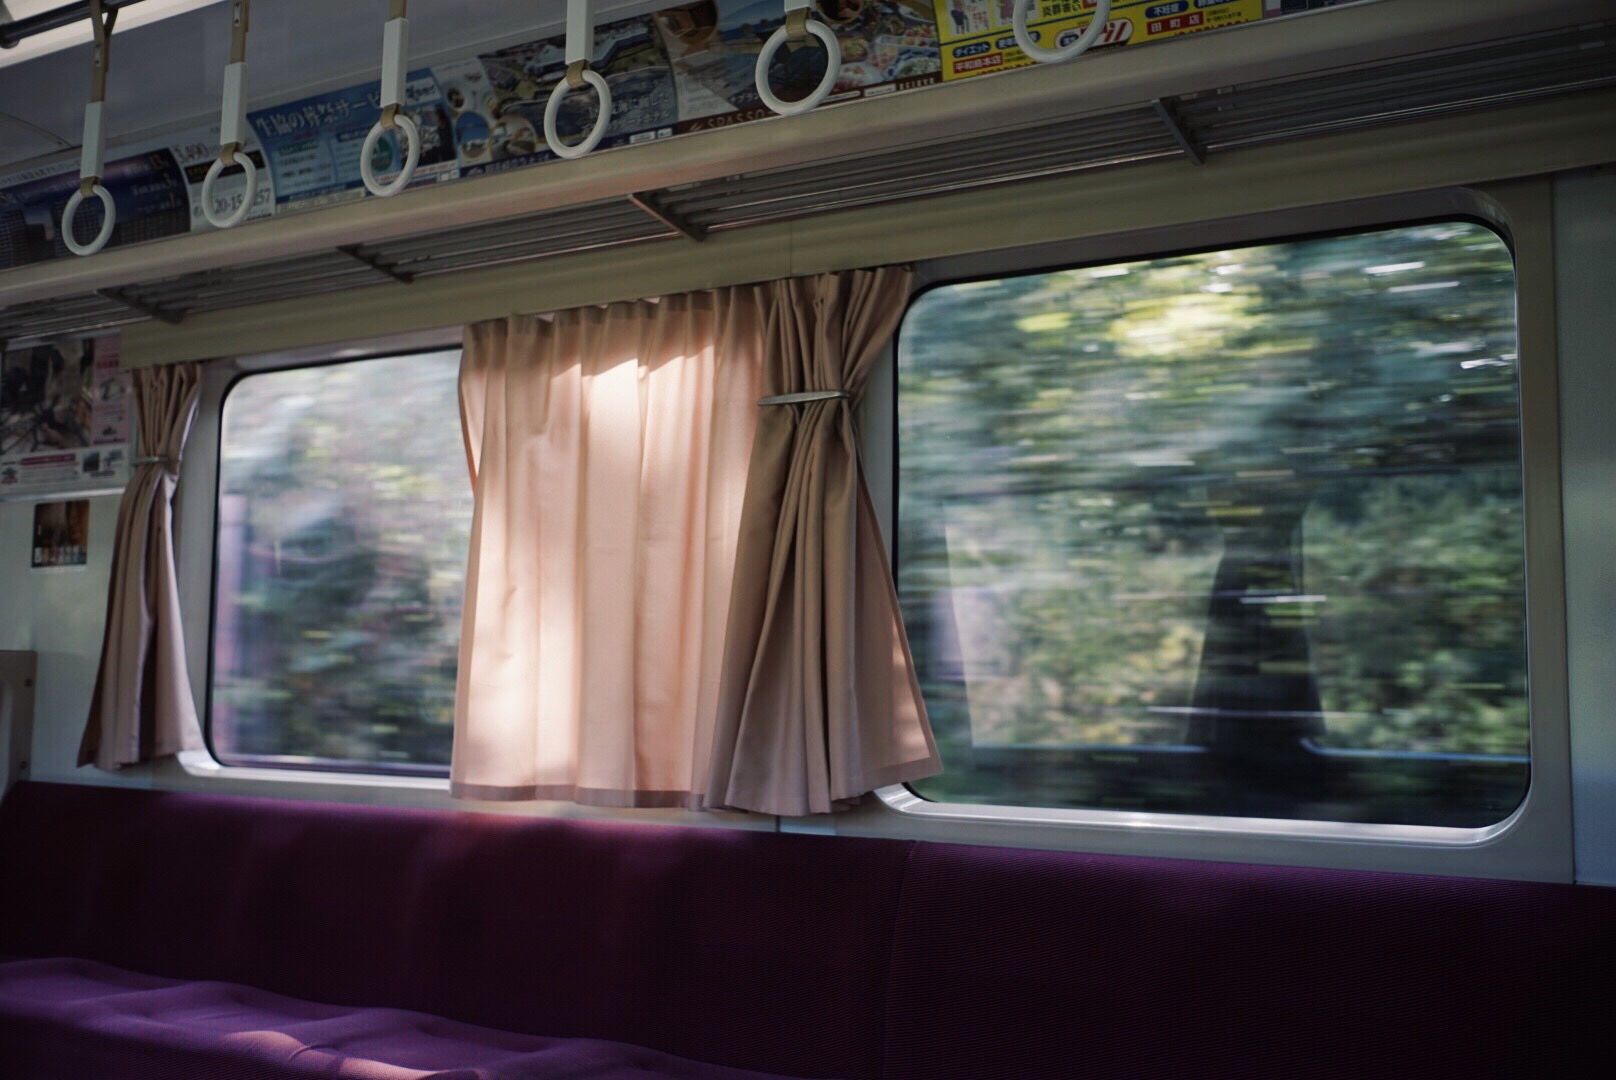 window, transparent, glass - material, close-up, illuminated, curtain, reflection, lens flare, day, window frame, public transport